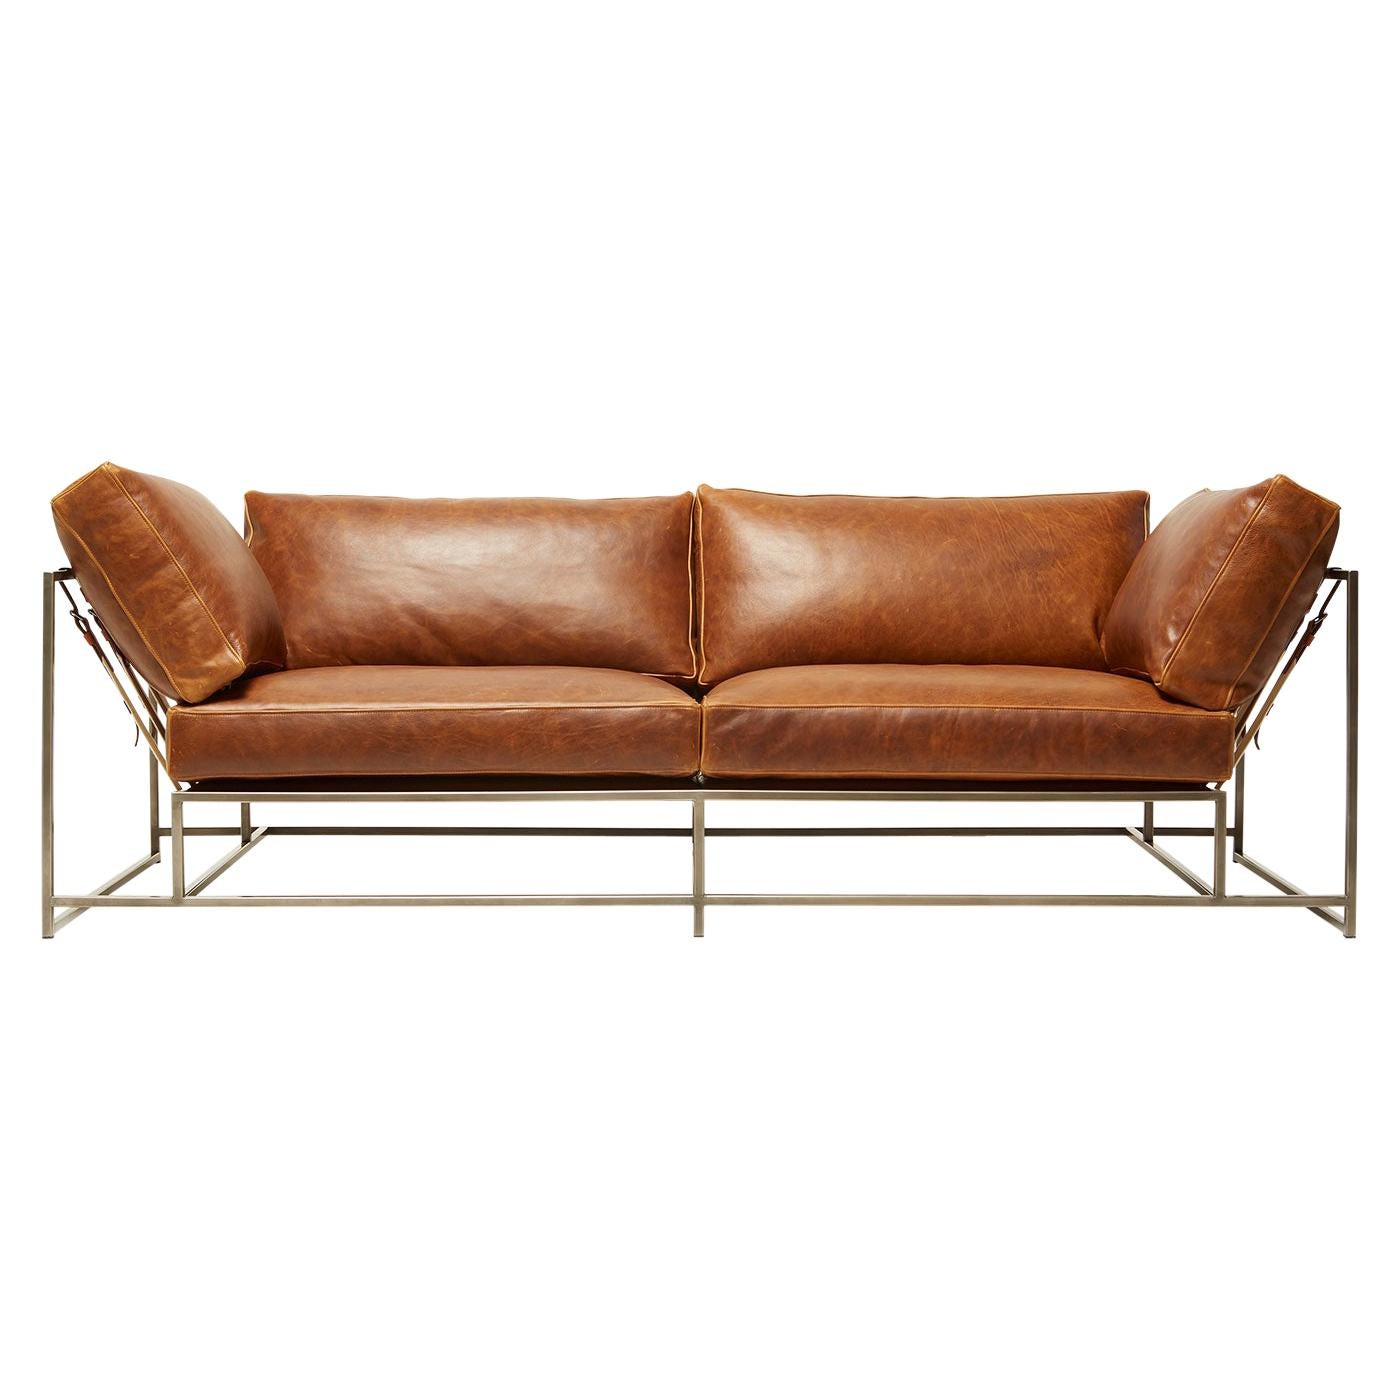 Potomac Leather and Antique Nickel Two-Seat Sofa with Off-White Belting For Sale